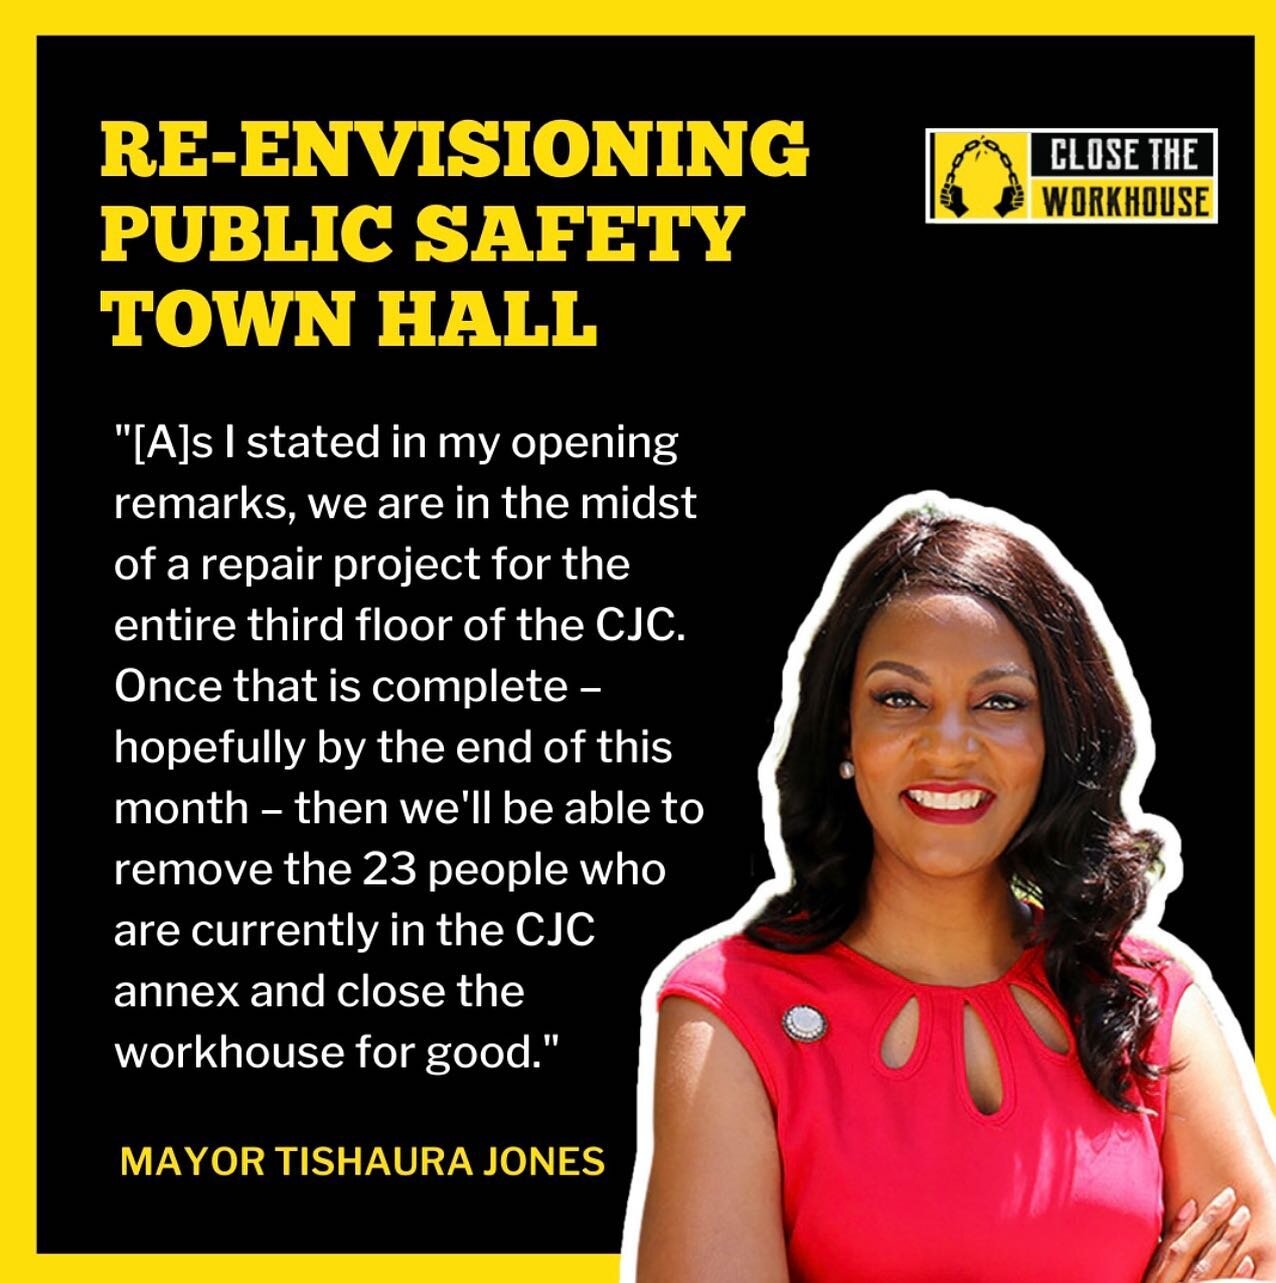 At our Re-envisioning Public Safety Townhall we heard Mayor Jones say, &quot;[A]s I stated in my opening remarks, we are in the midst of a repair project for the entire third floor of the CJC. Once that is complete &ndash; hopefully by the end of thi